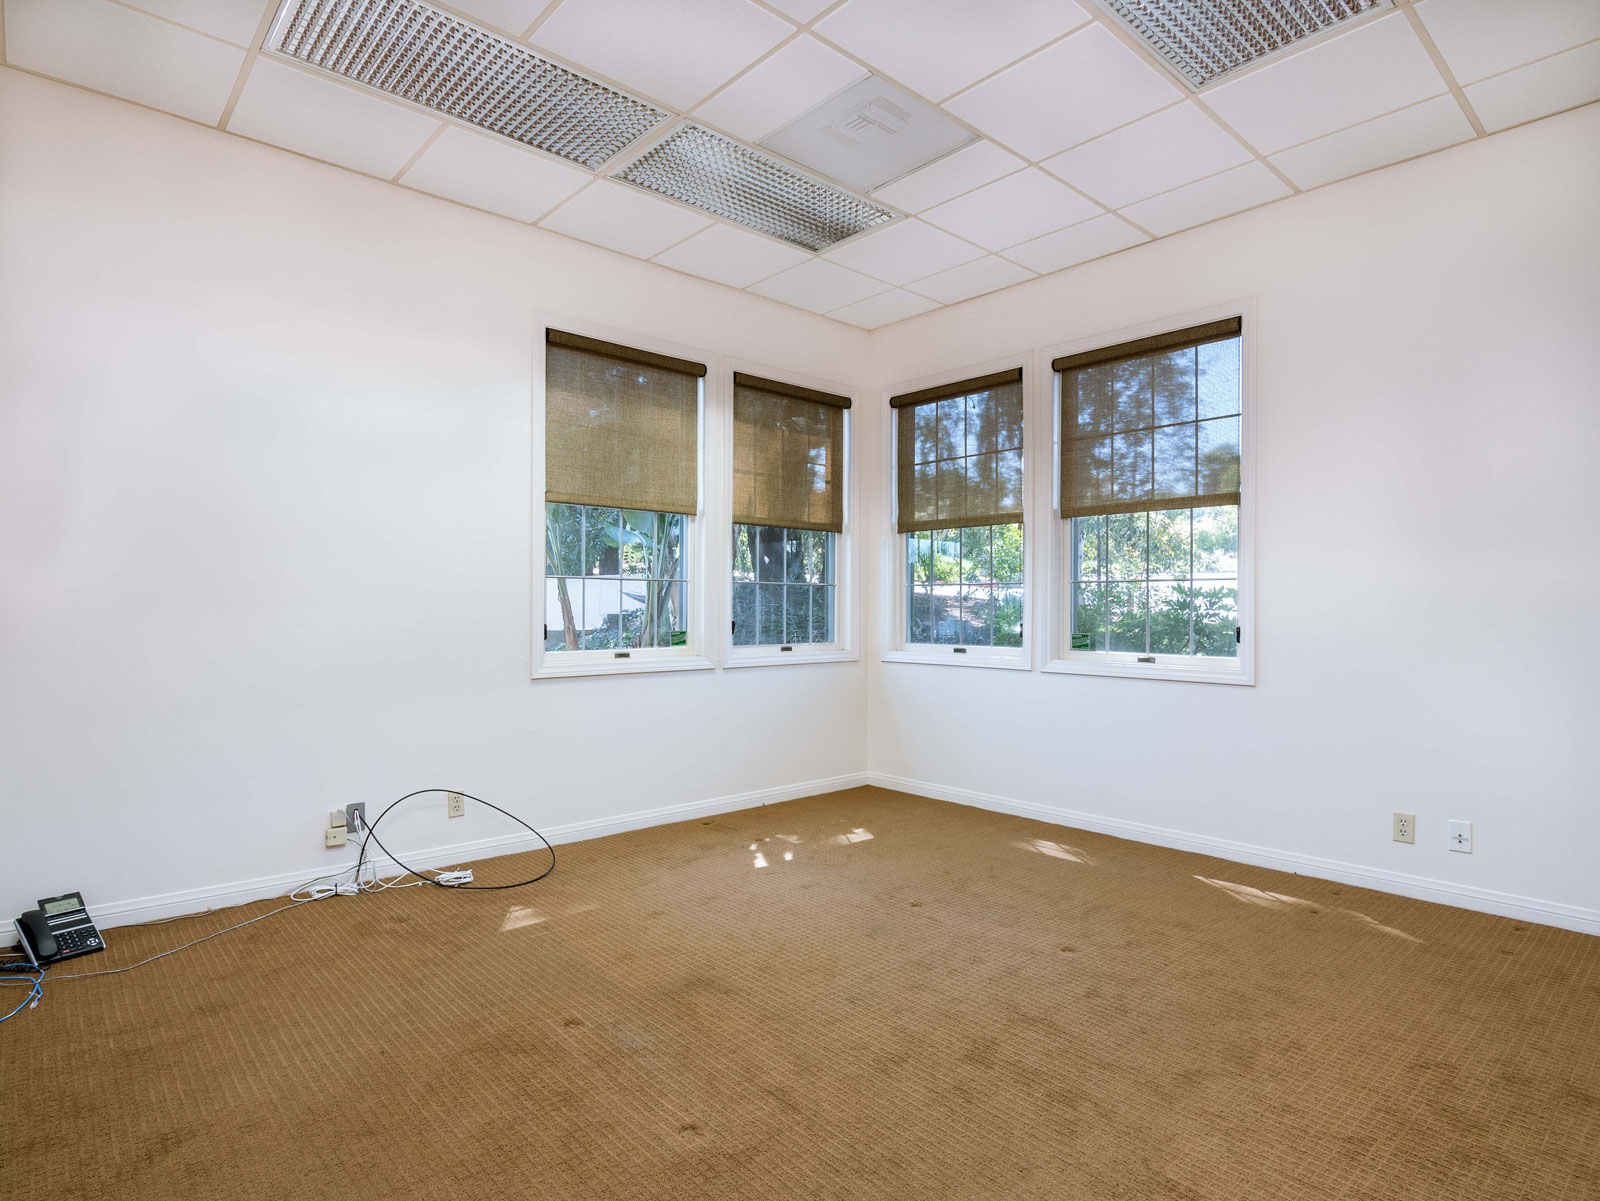 316-s-melrose-vista-ca-professional-office-for-lease-102-2